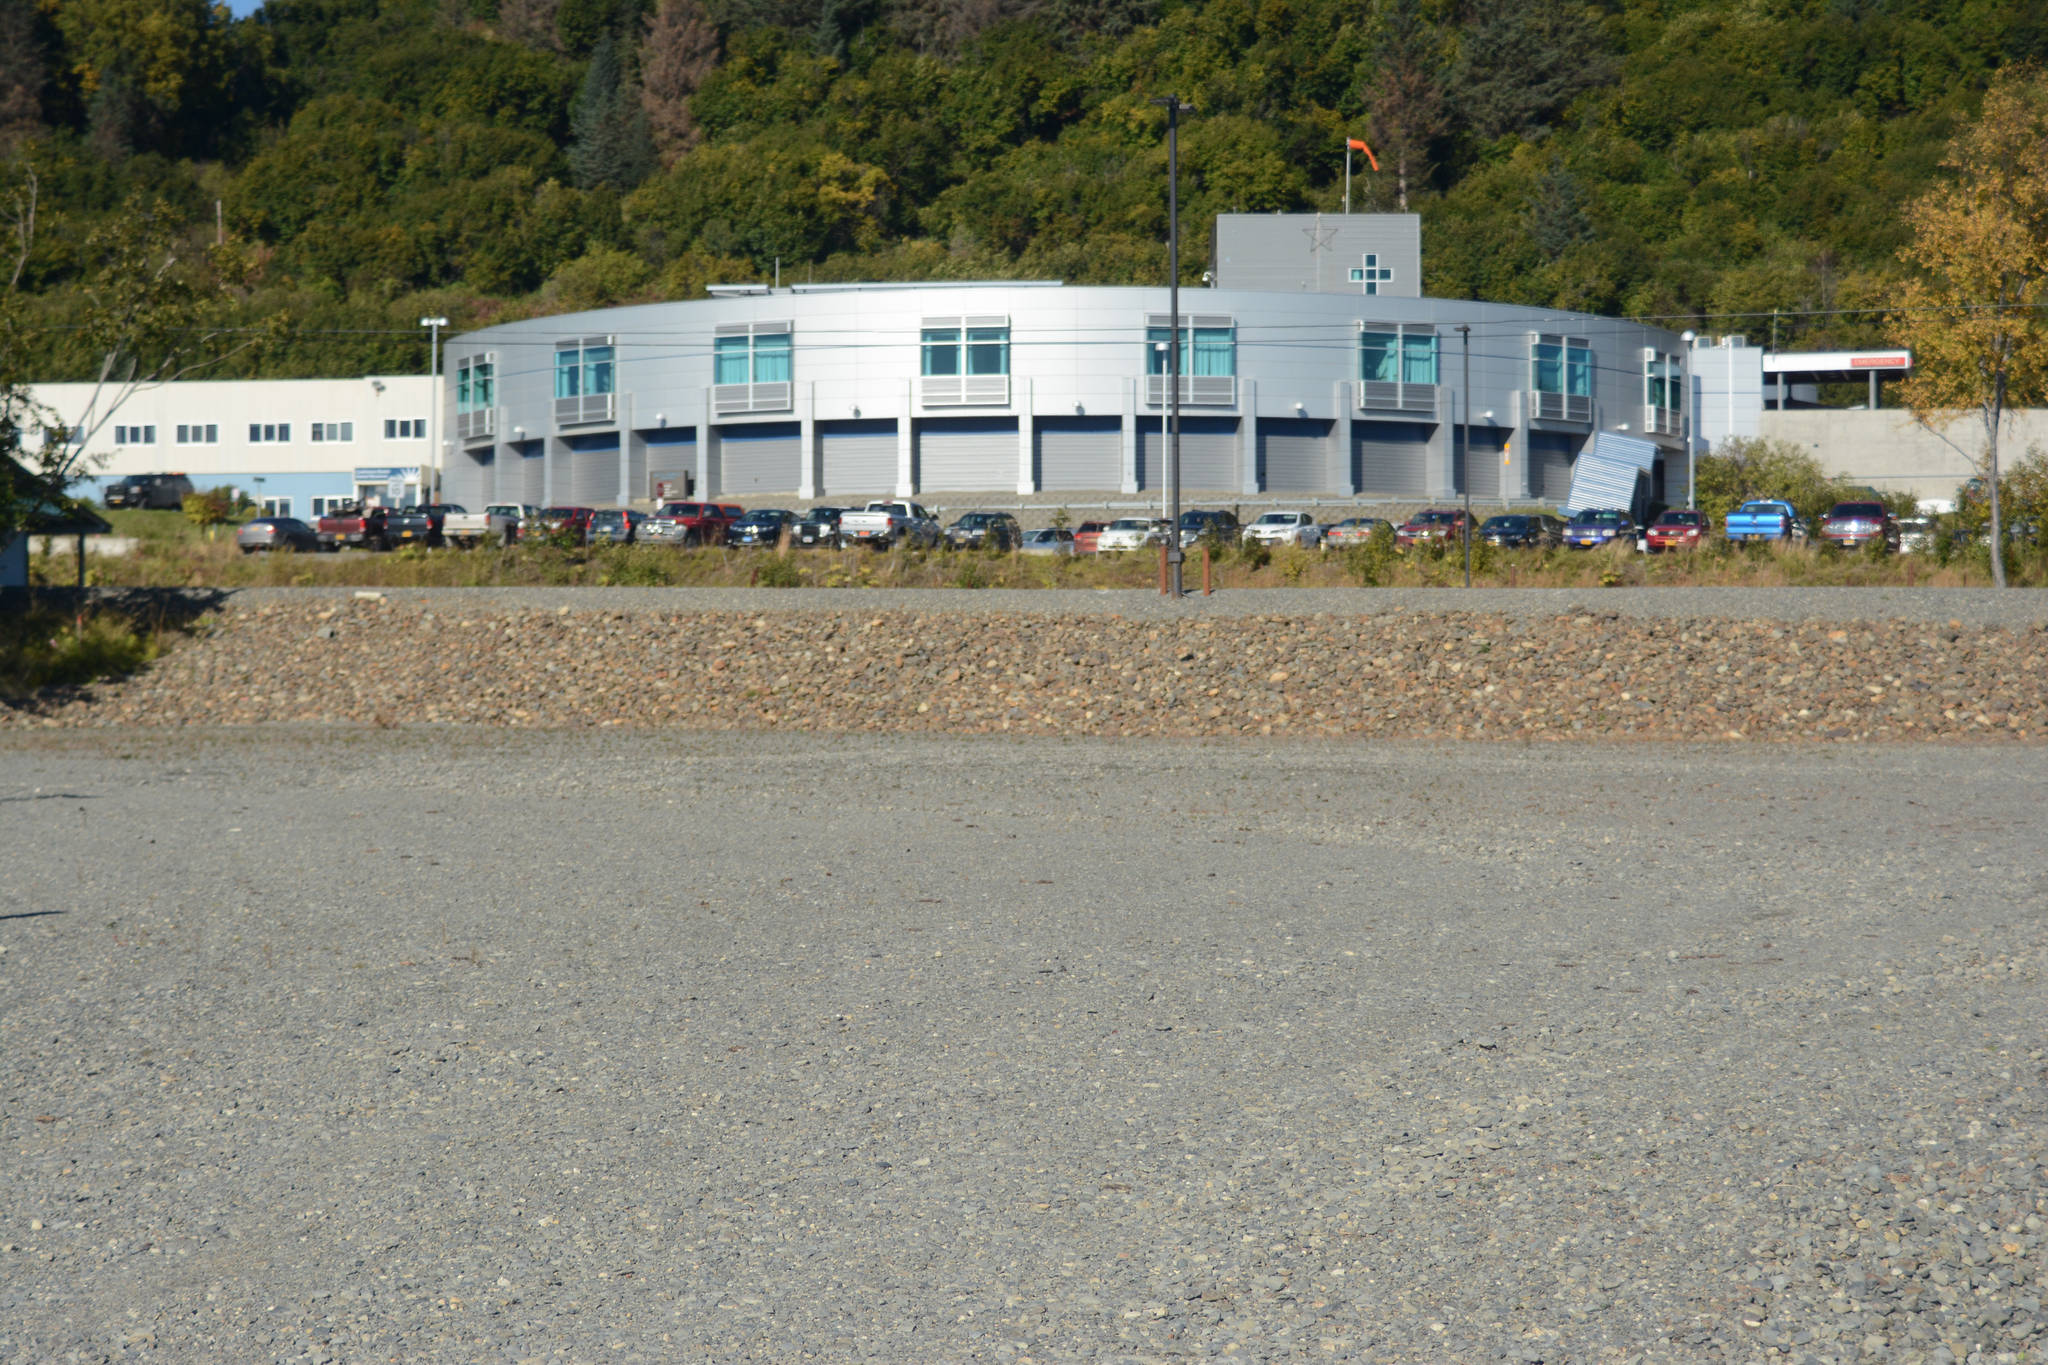 Dr. Paul Raymond’s proposed 20,000-square-foot medical building would go on this empty lot between Homer Medical Clinic and South Peninsula Hospital, as seen on Sept. 25, 2018, in Homer, Alaska. The Homer Advisory Planning Commission at its Sept. 19 meeting approved a Conditional Use Permit for the building. (Photo by Michael Armstrong/Homer News)